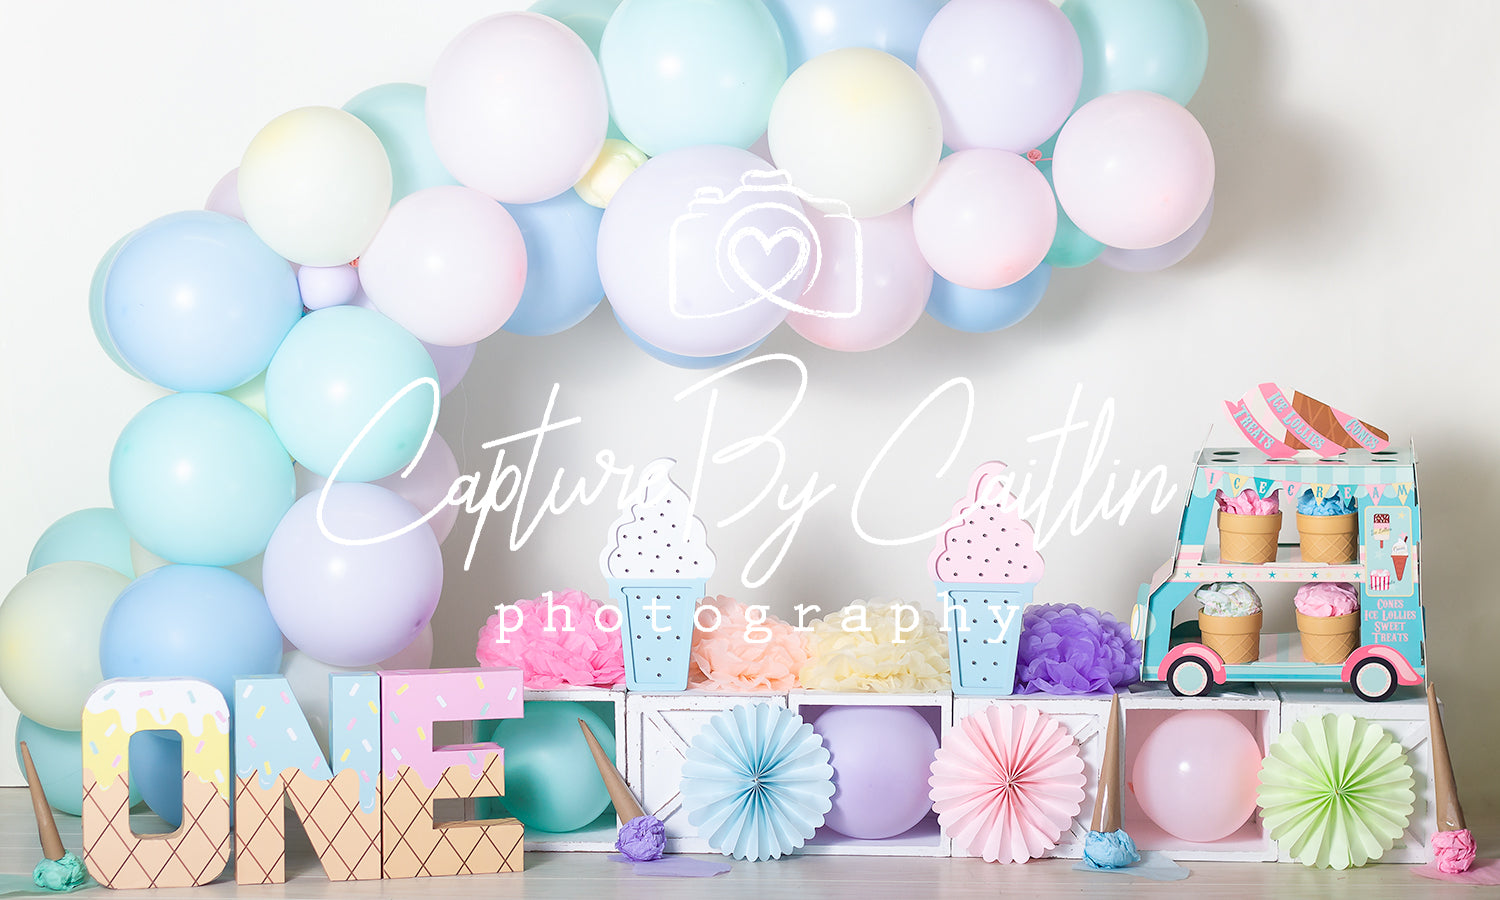 Kate Pastel Ice Cream Backdrop Designed by Caitlin Lynch